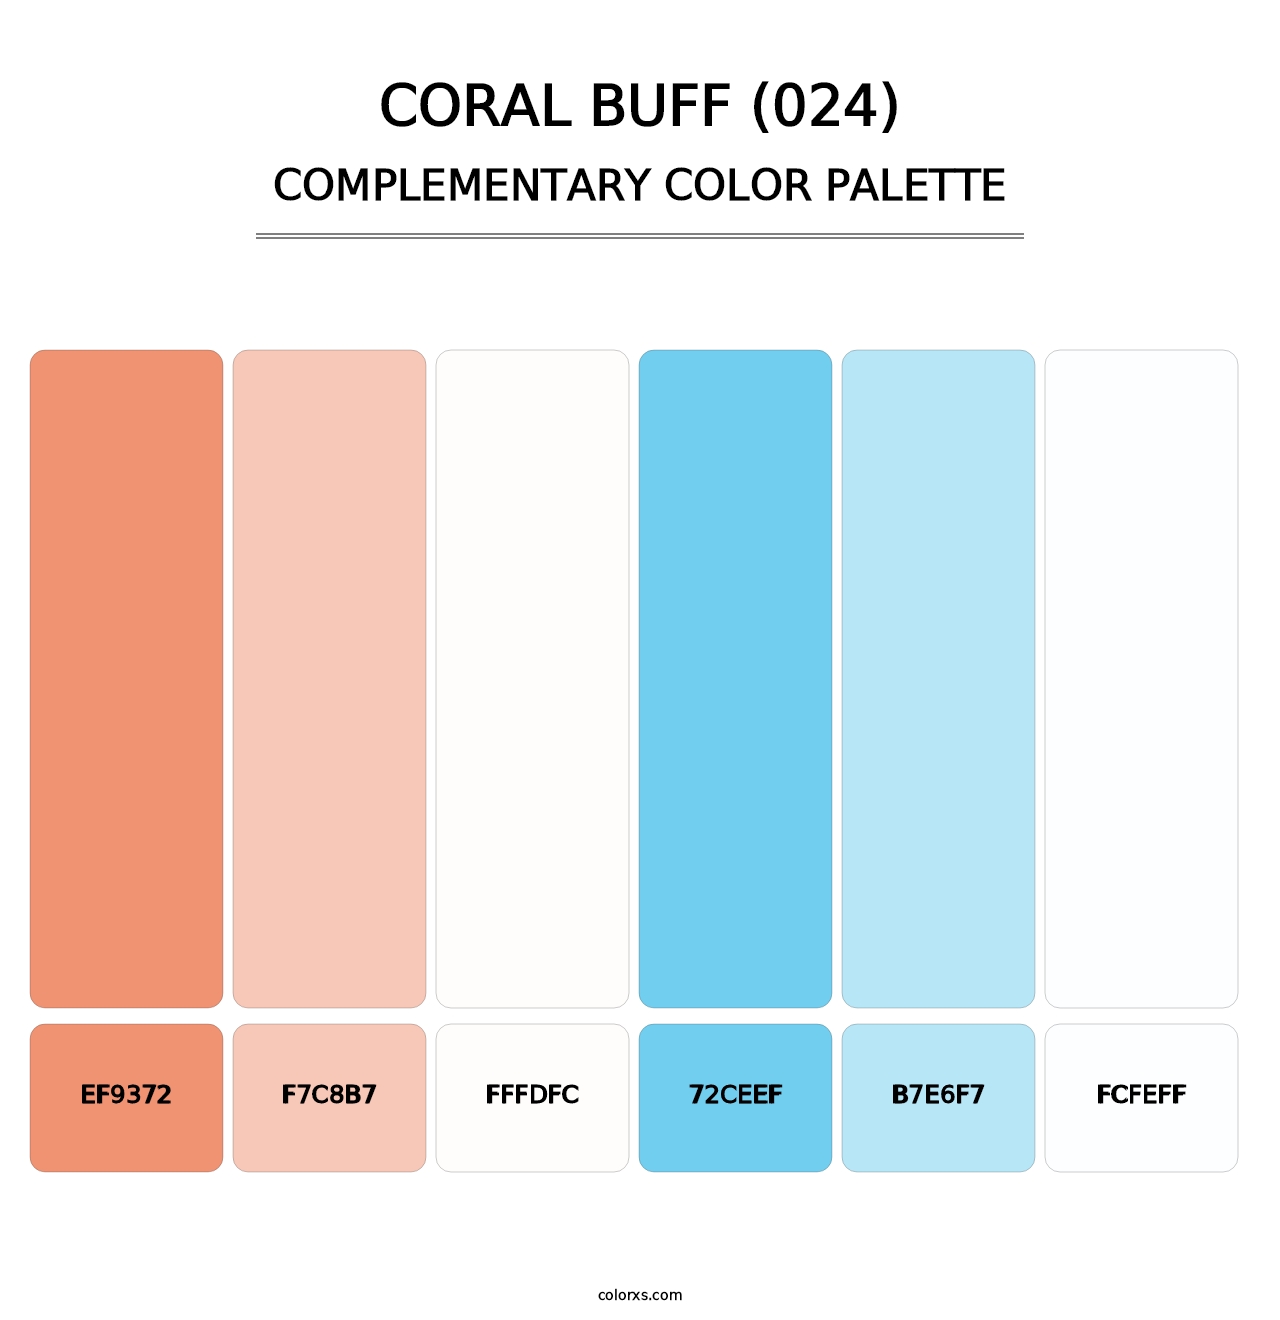 Coral Buff (024) - Complementary Color Palette